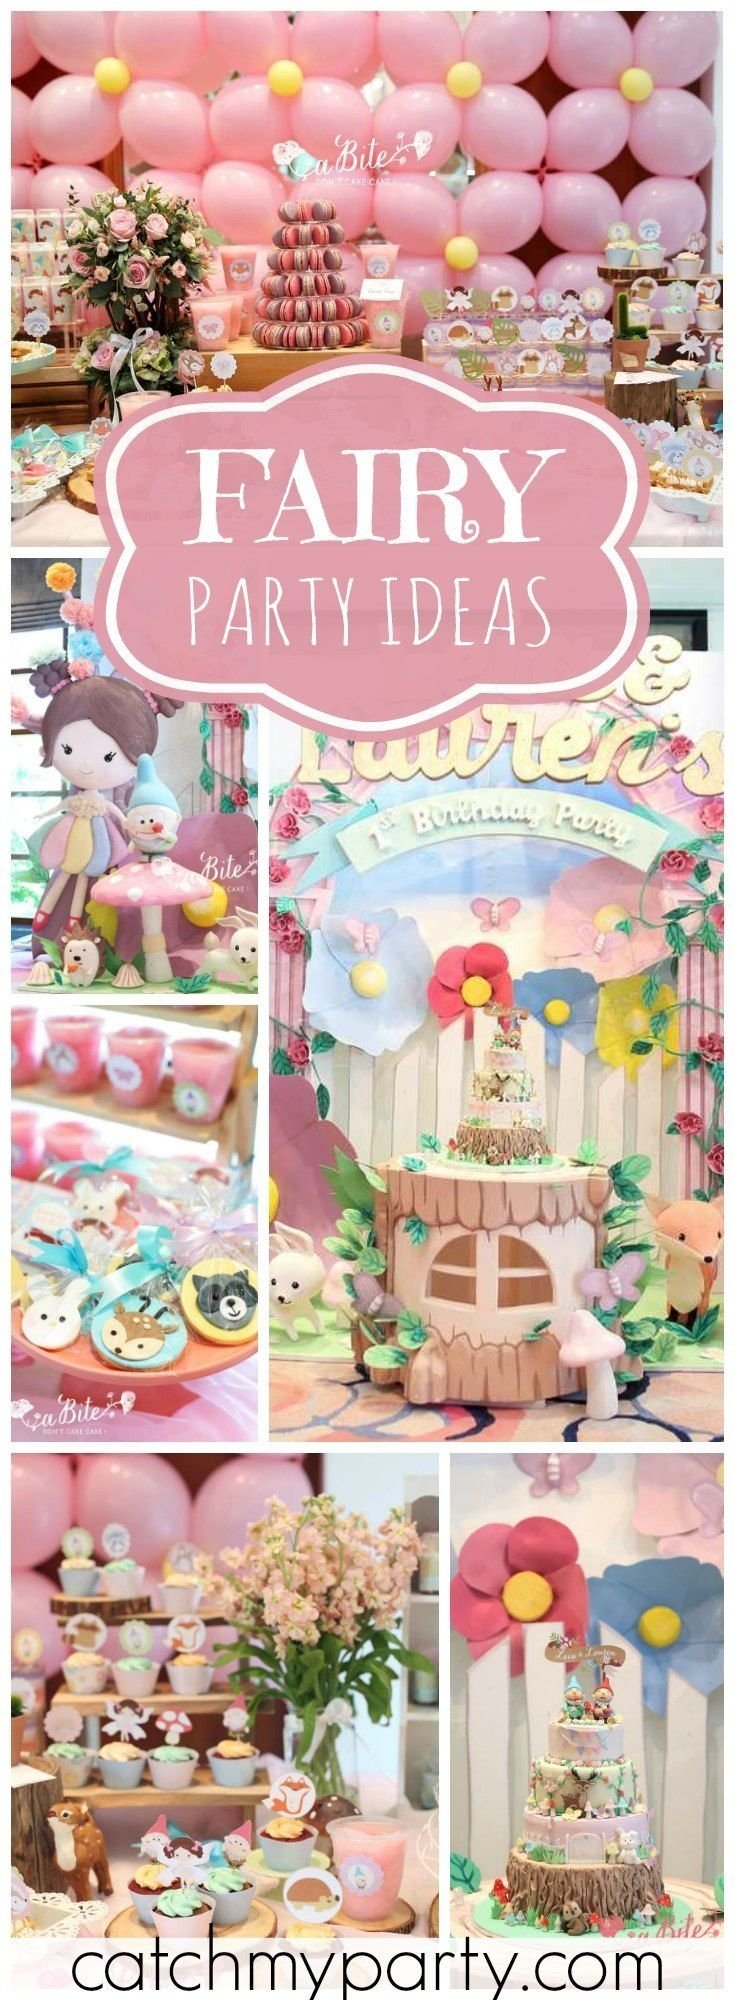 10 Most Recommended Birthday Party Theme Ideas For Girls 416 best girl birthday party ideas images on pinterest birthday 2022